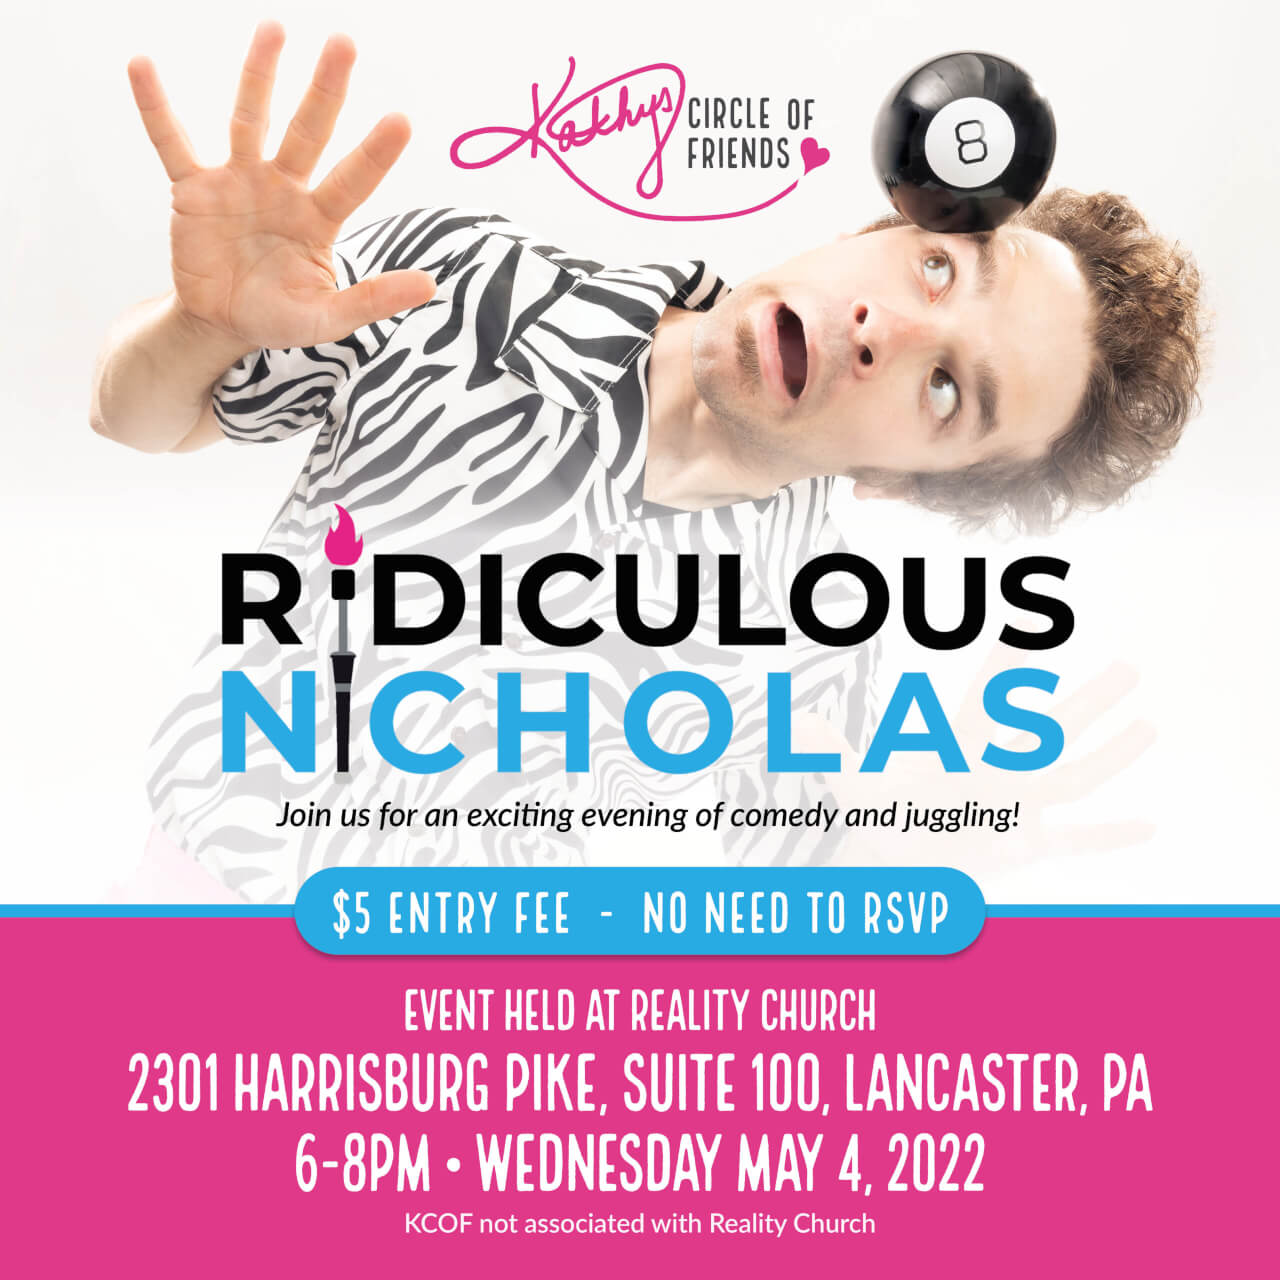 RIDICULOUS NICHOLAS! Join Us For An Exciting Evening of Comedy and Juggling!! $5 Entry Fee No need to RSVP Event will be held at our home venue - Reality Church